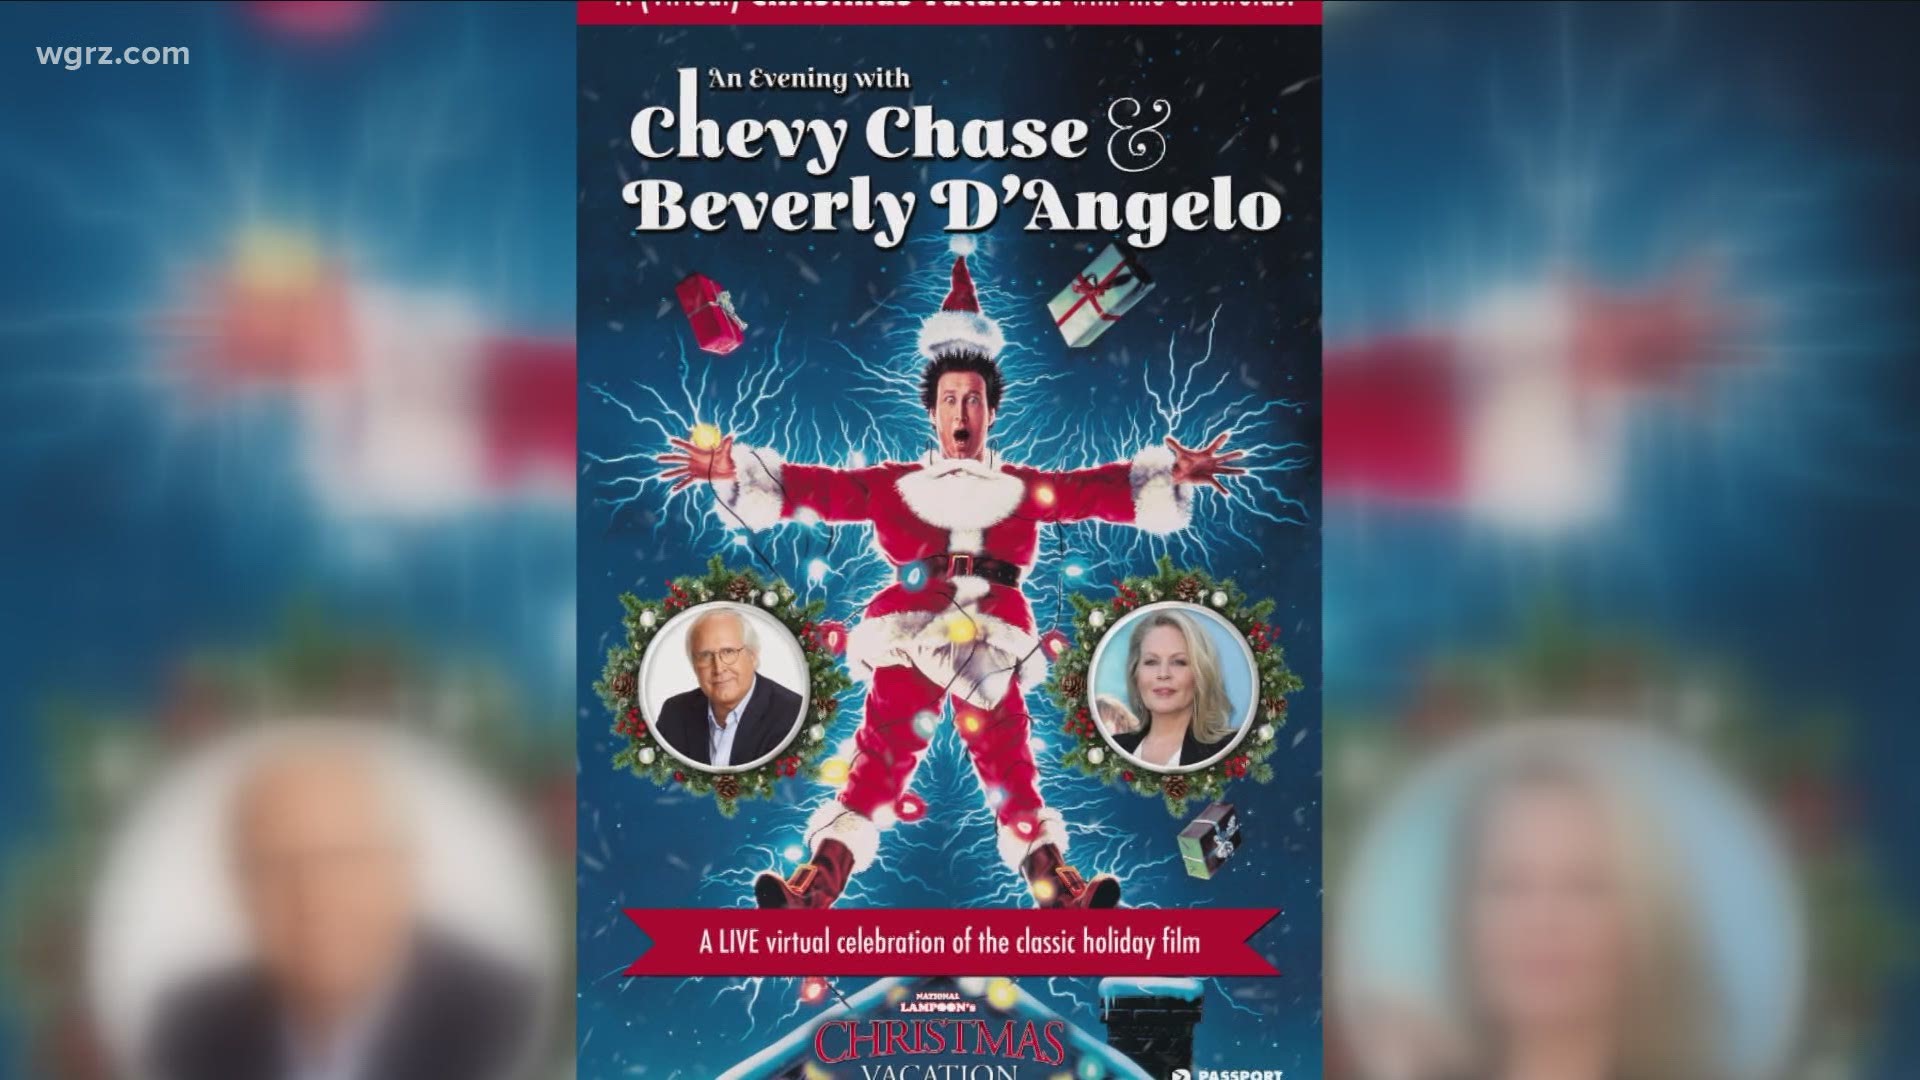 Artpark is hosting a fundraiser where you can chat with the stars of the movie 'Christmas Vacation'- Chevy Chase and Beverly D’Angelo.